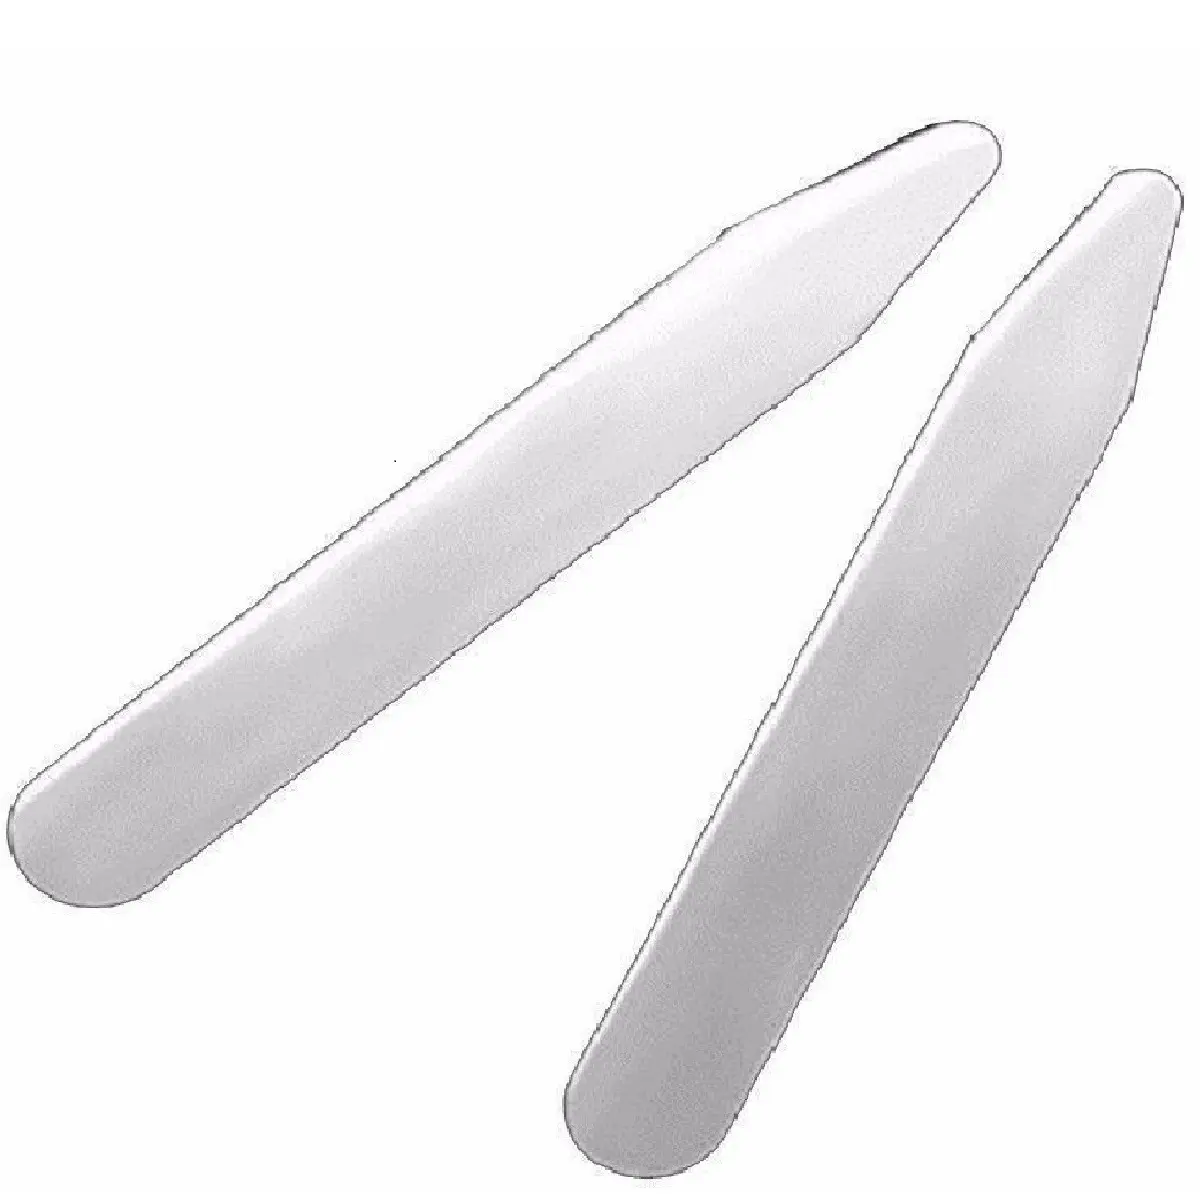 Metal Collar Stays 2 2.2 2.5 2.7 3 inches One Size Various Size for Men Shirts Metal Collar Bones Inserts Stiffeners